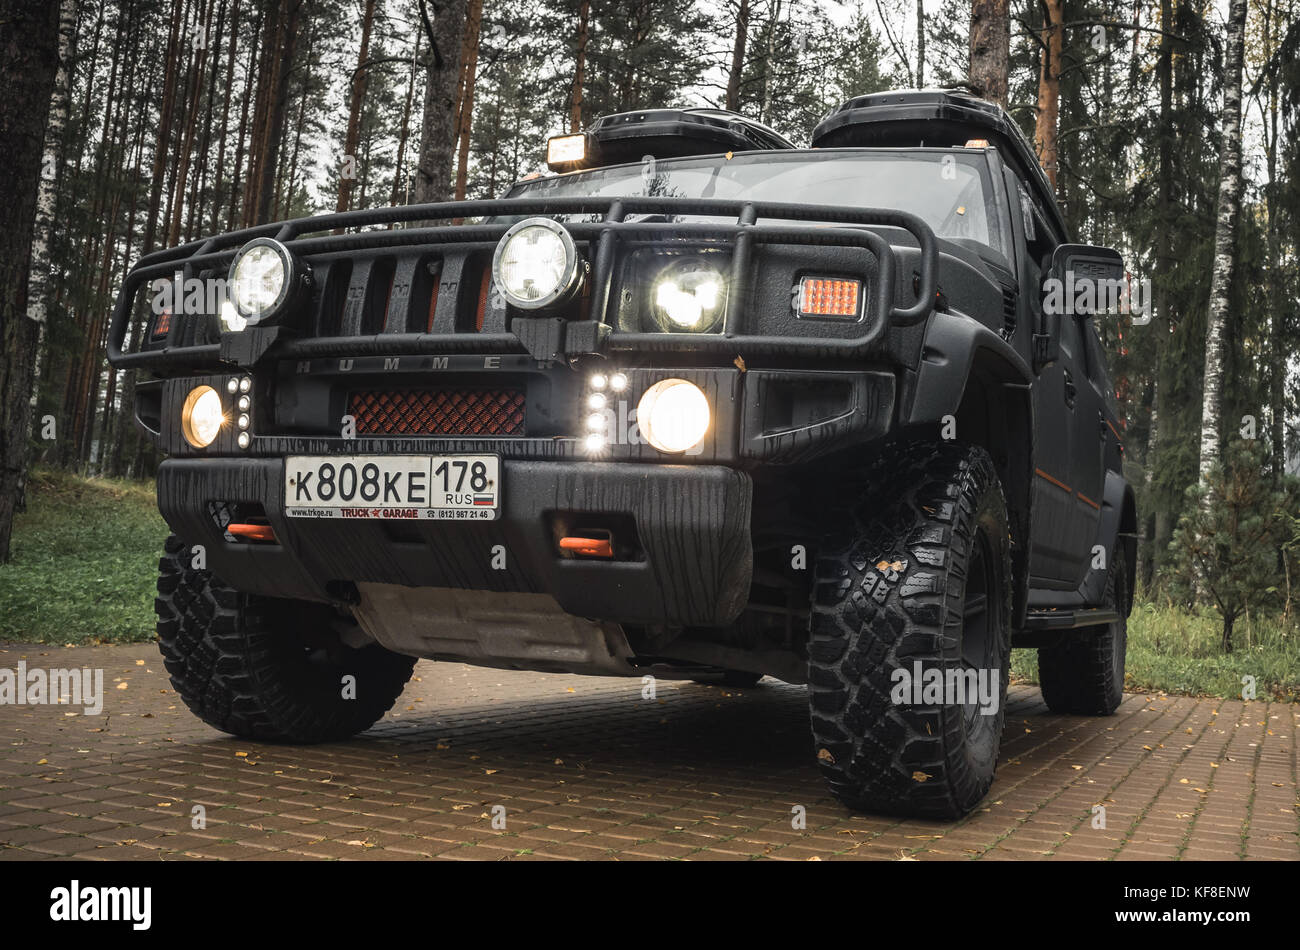 Saint-Petersburg, Russia - October 8, 2017: Black Hummer H2 car stands on rural parking lot in Russian countryside, close up photo, headlights on Stock Photo